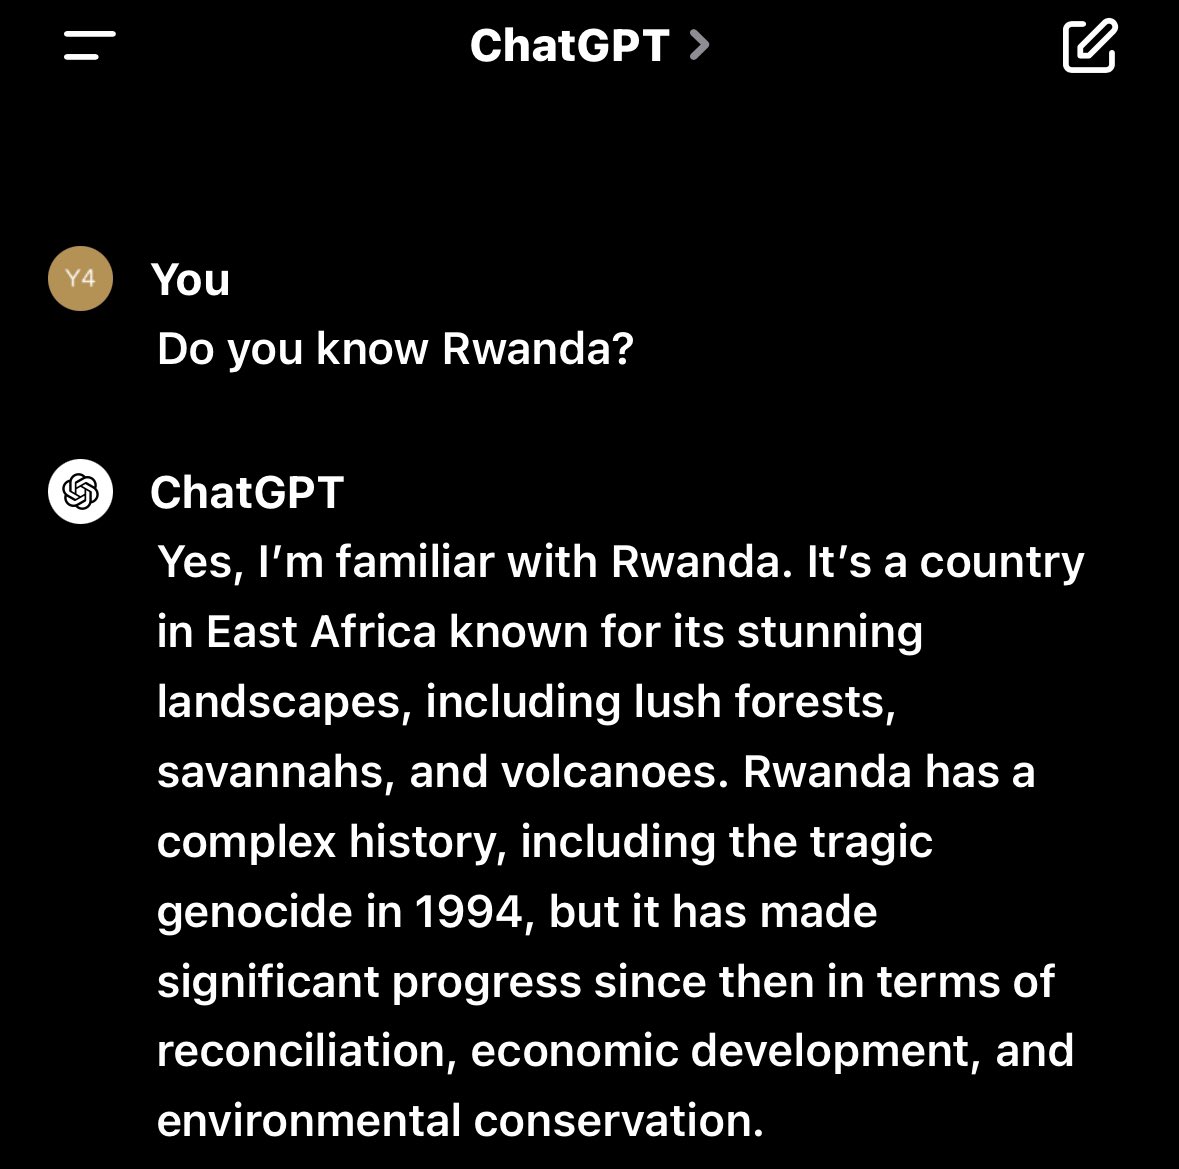 Even ChatGPT knows that Rwanda made a “Significant Progress after the genocide against Tutsi in 1994” all after new leadership. #RwandaIsOpen #RwandaWorks